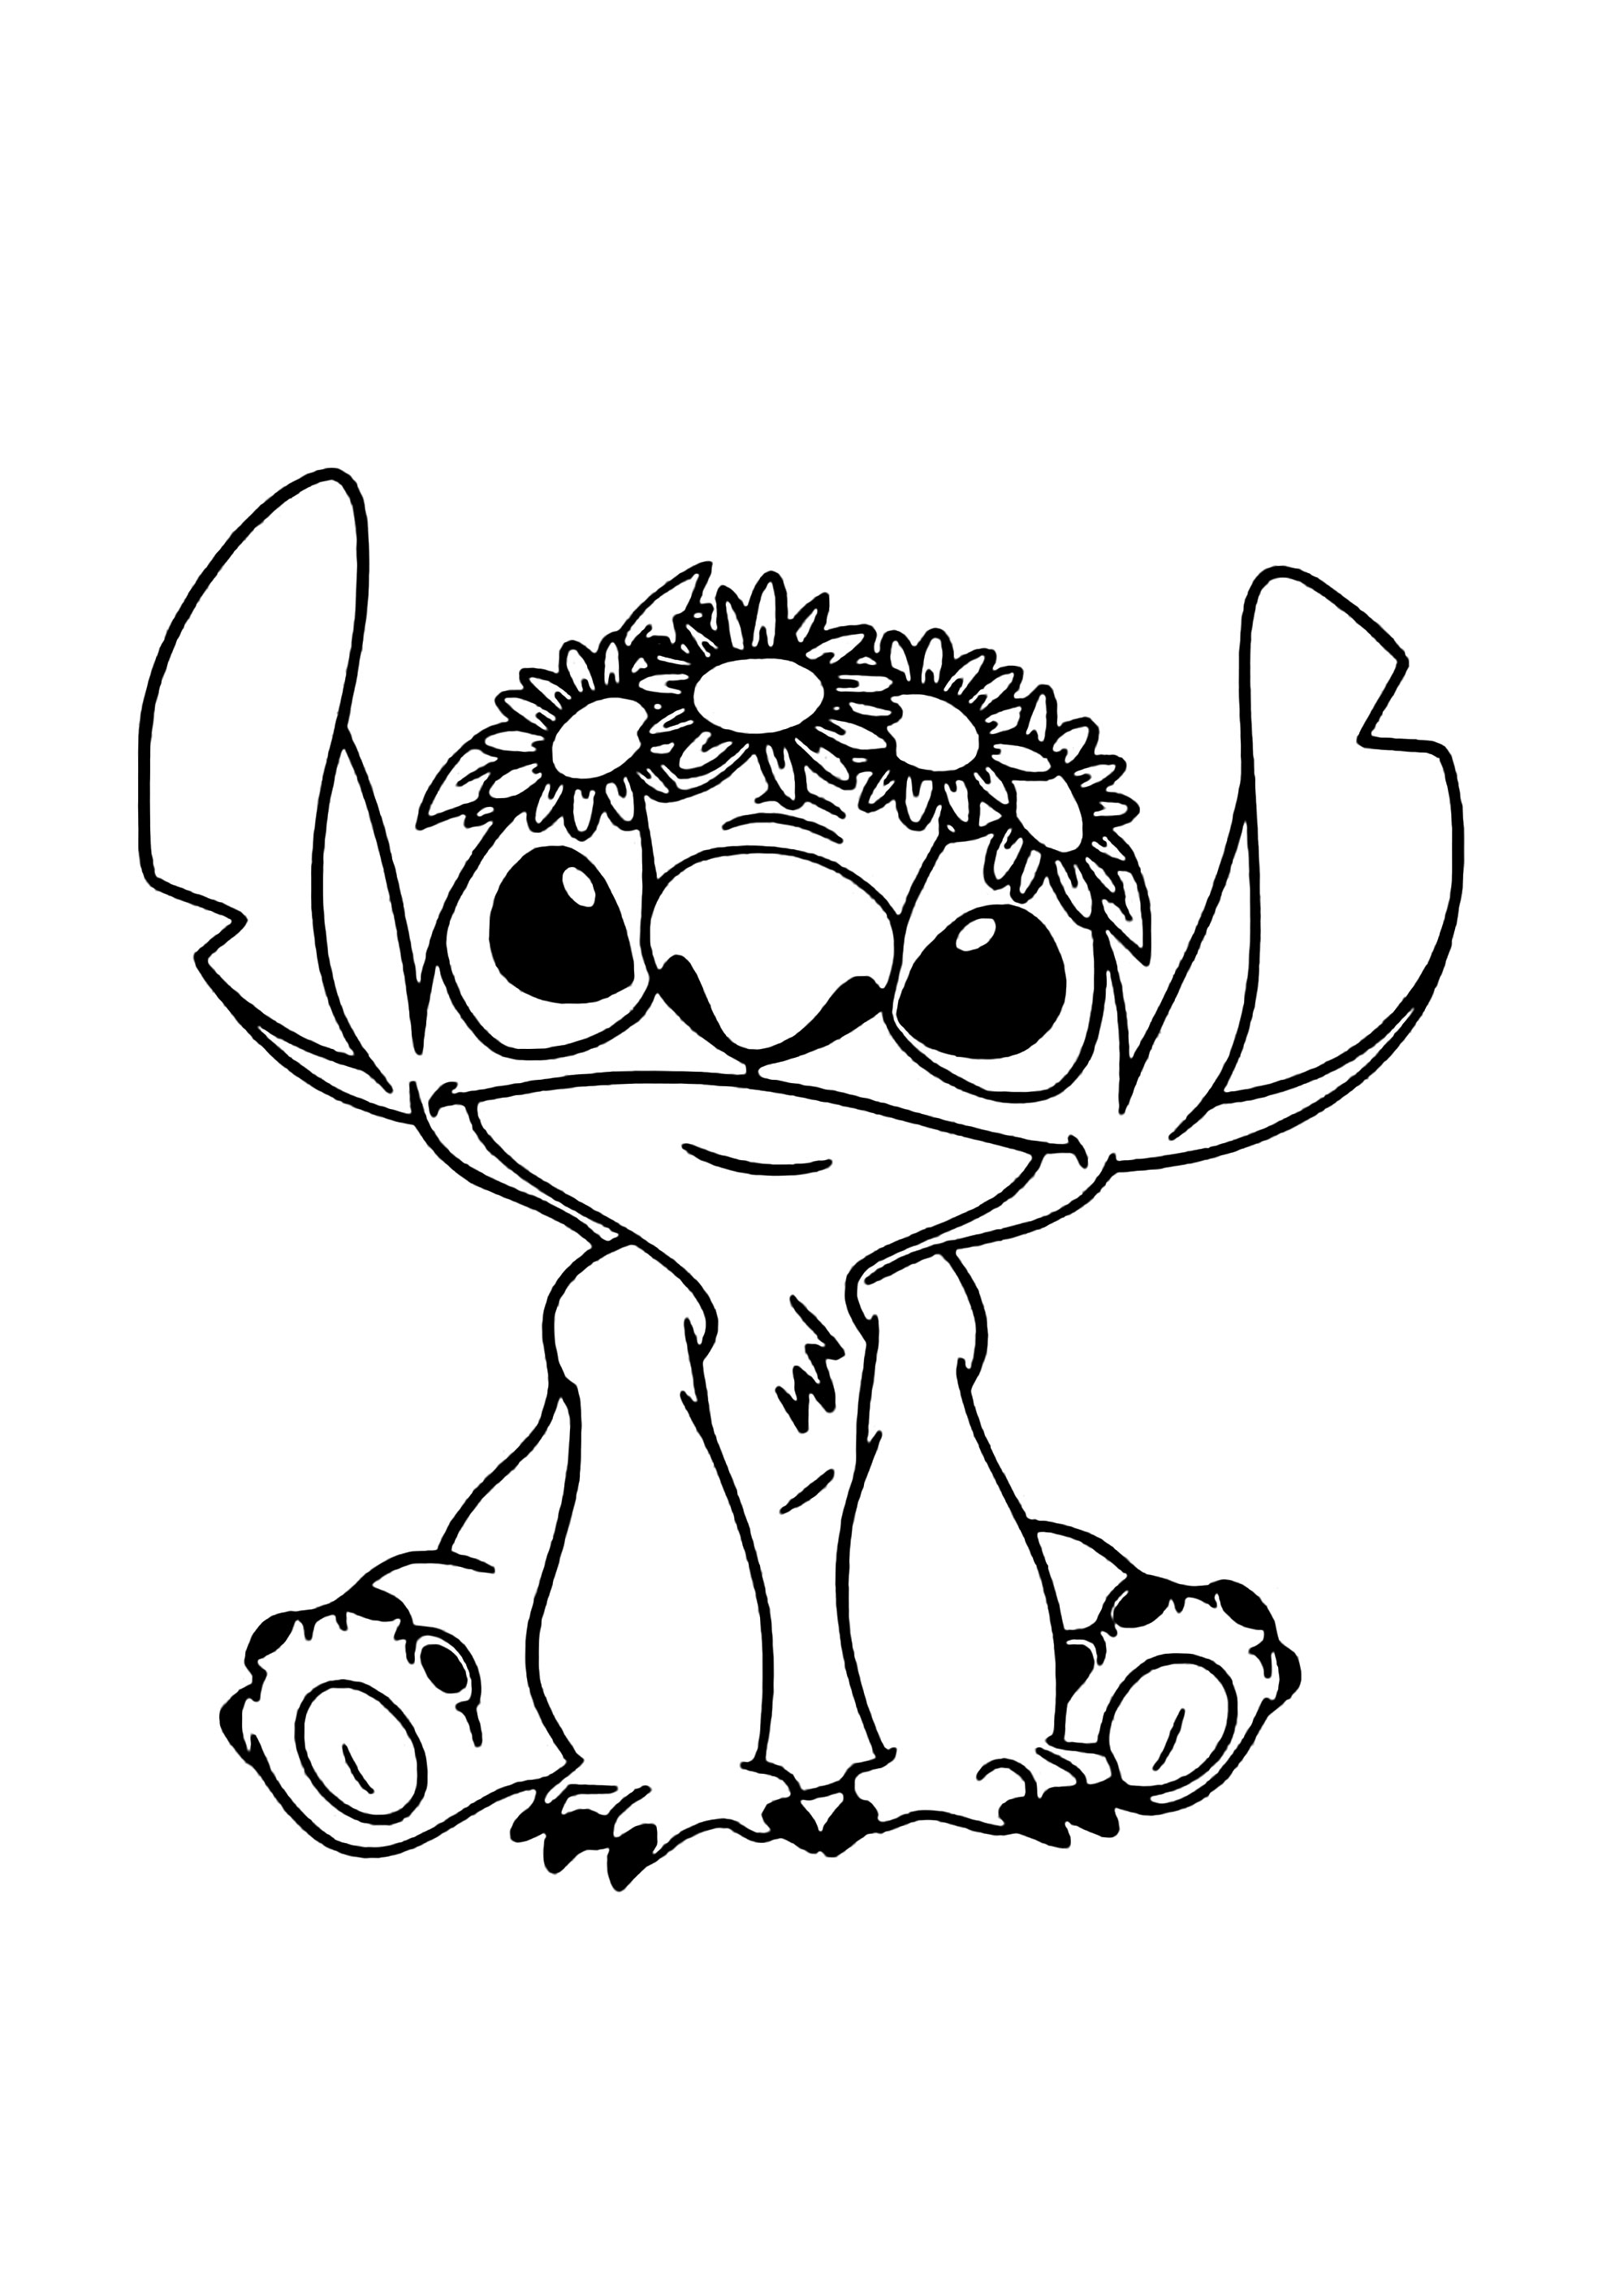 Stitch and his flower crown